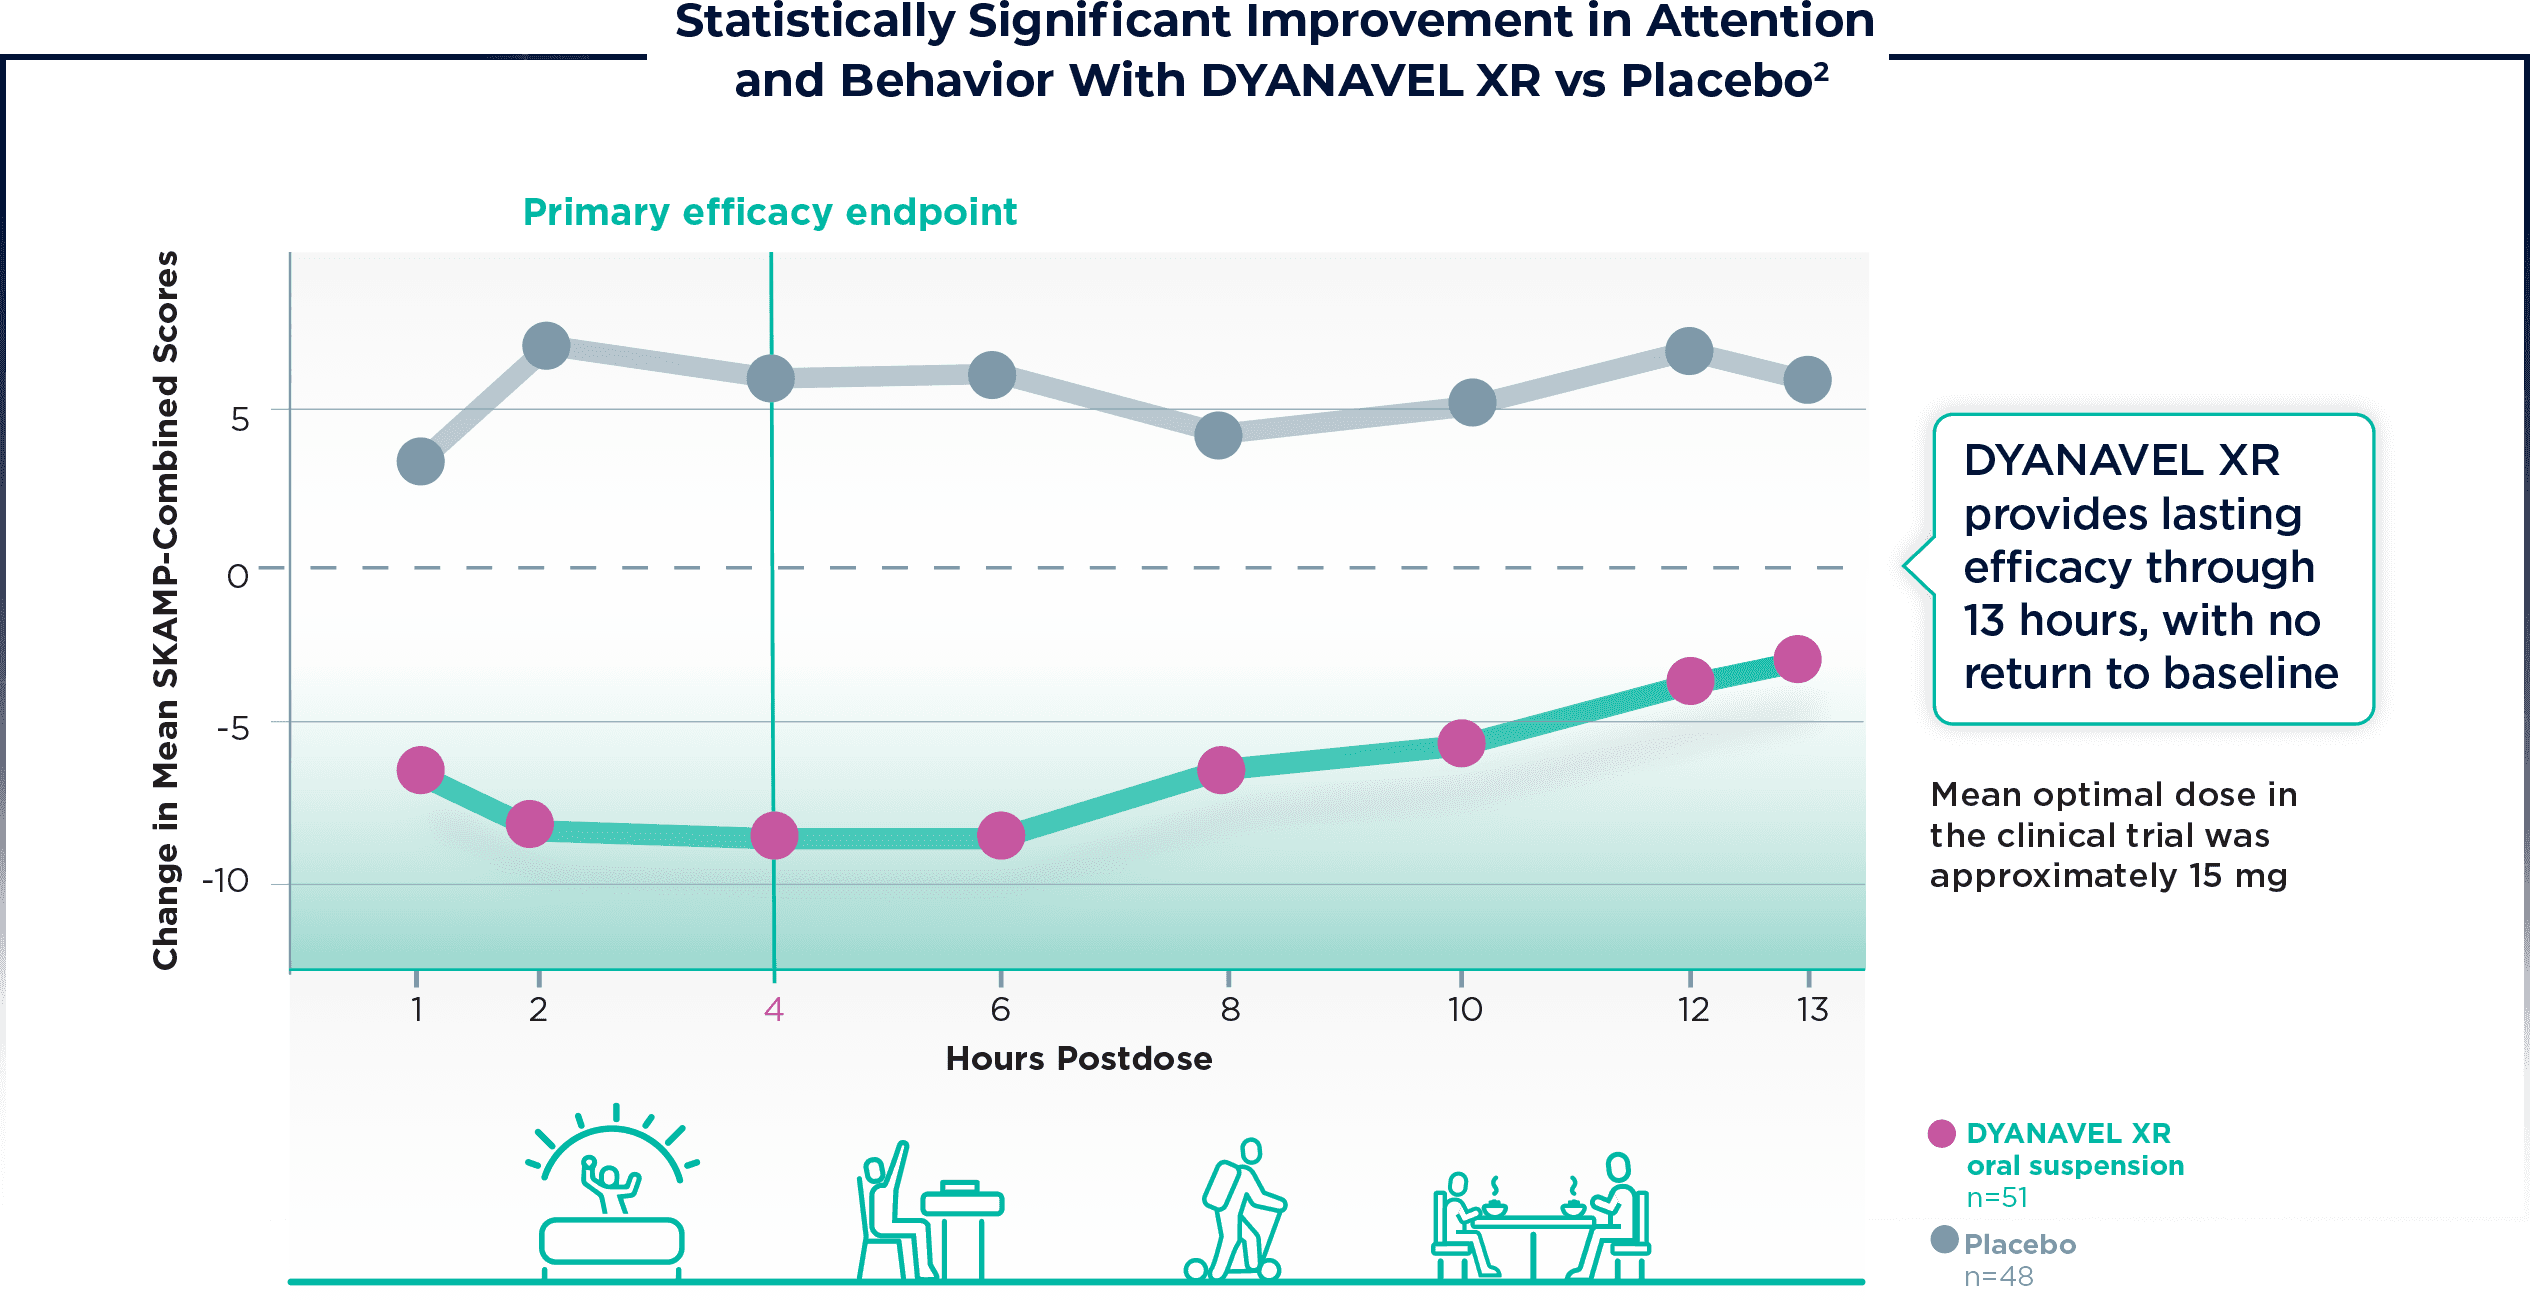 Graph: Statistically Significant Improvement In Attention and Behavior With DYANAVEL XR Oral Suspension vs Placebo